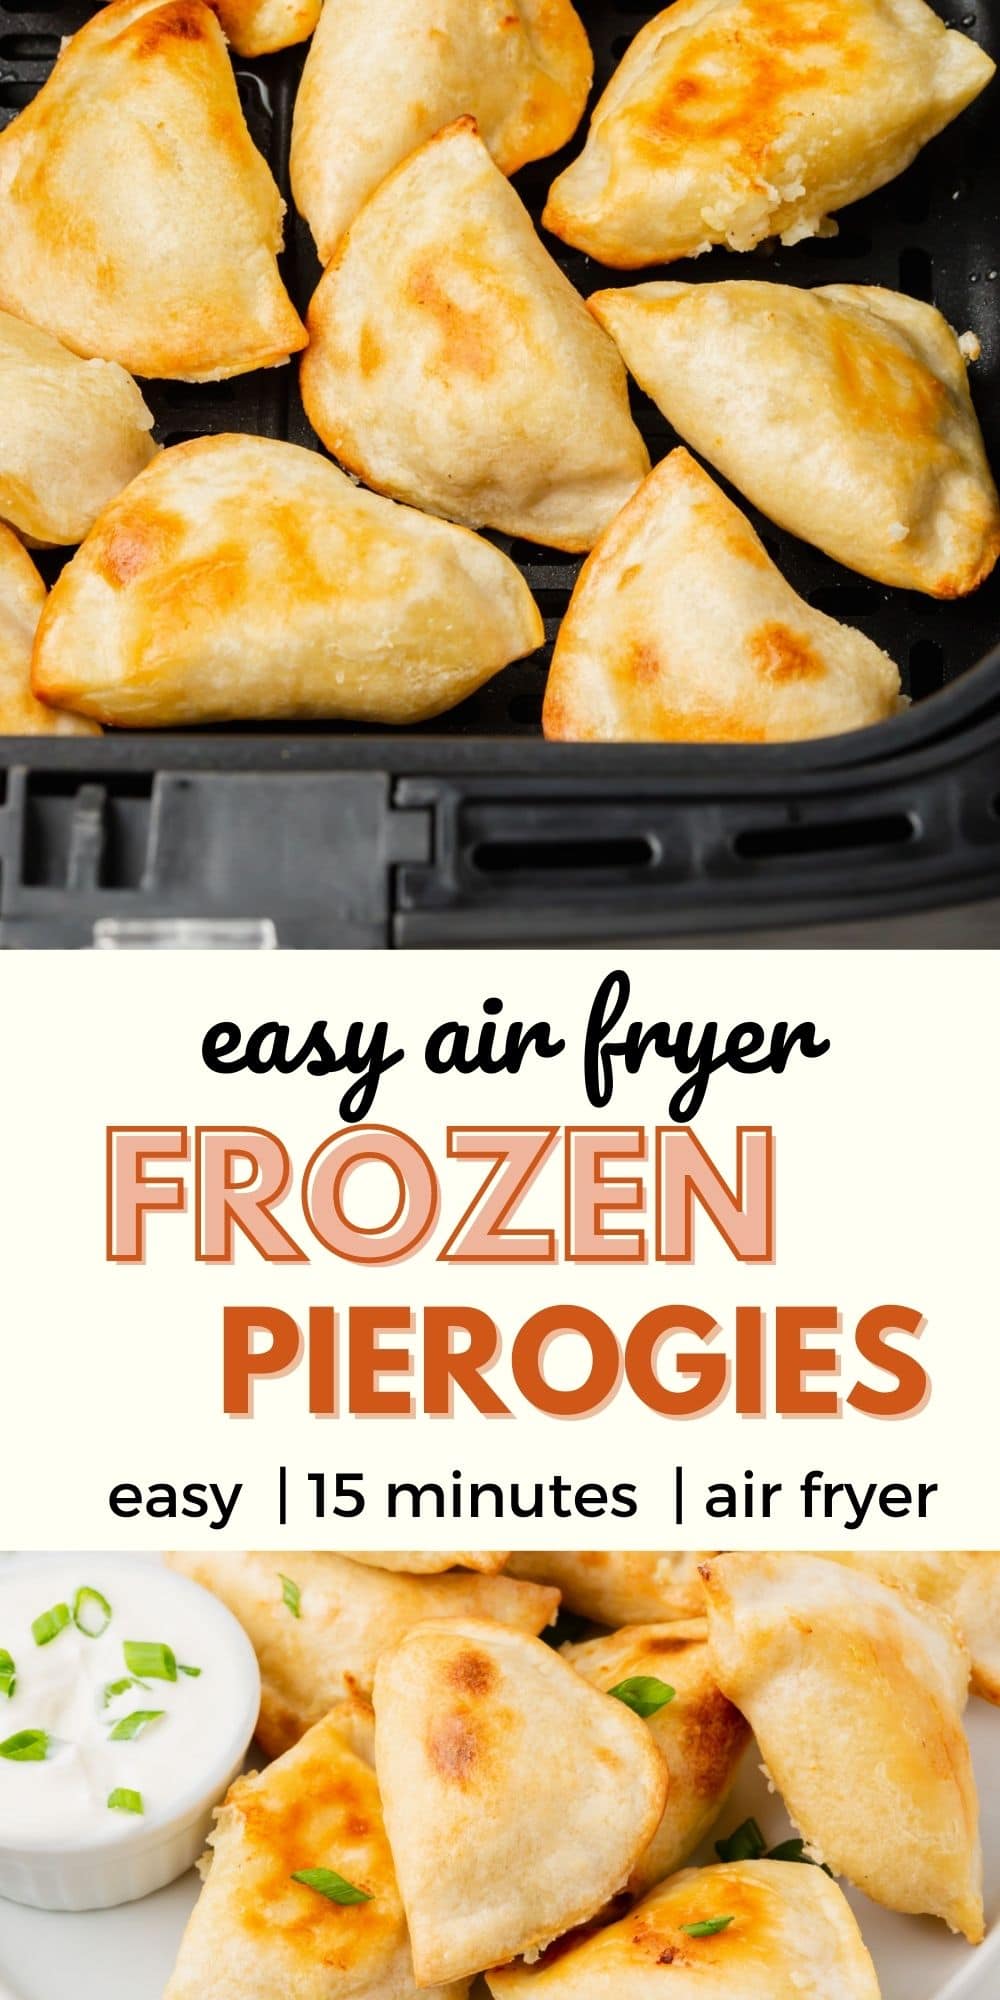 Never wonder how to make frozen pierogies in the air fryer again. With these simple instructions they'll come out soft and perfectly crispy on the outside every time. via @vegetarianmamma